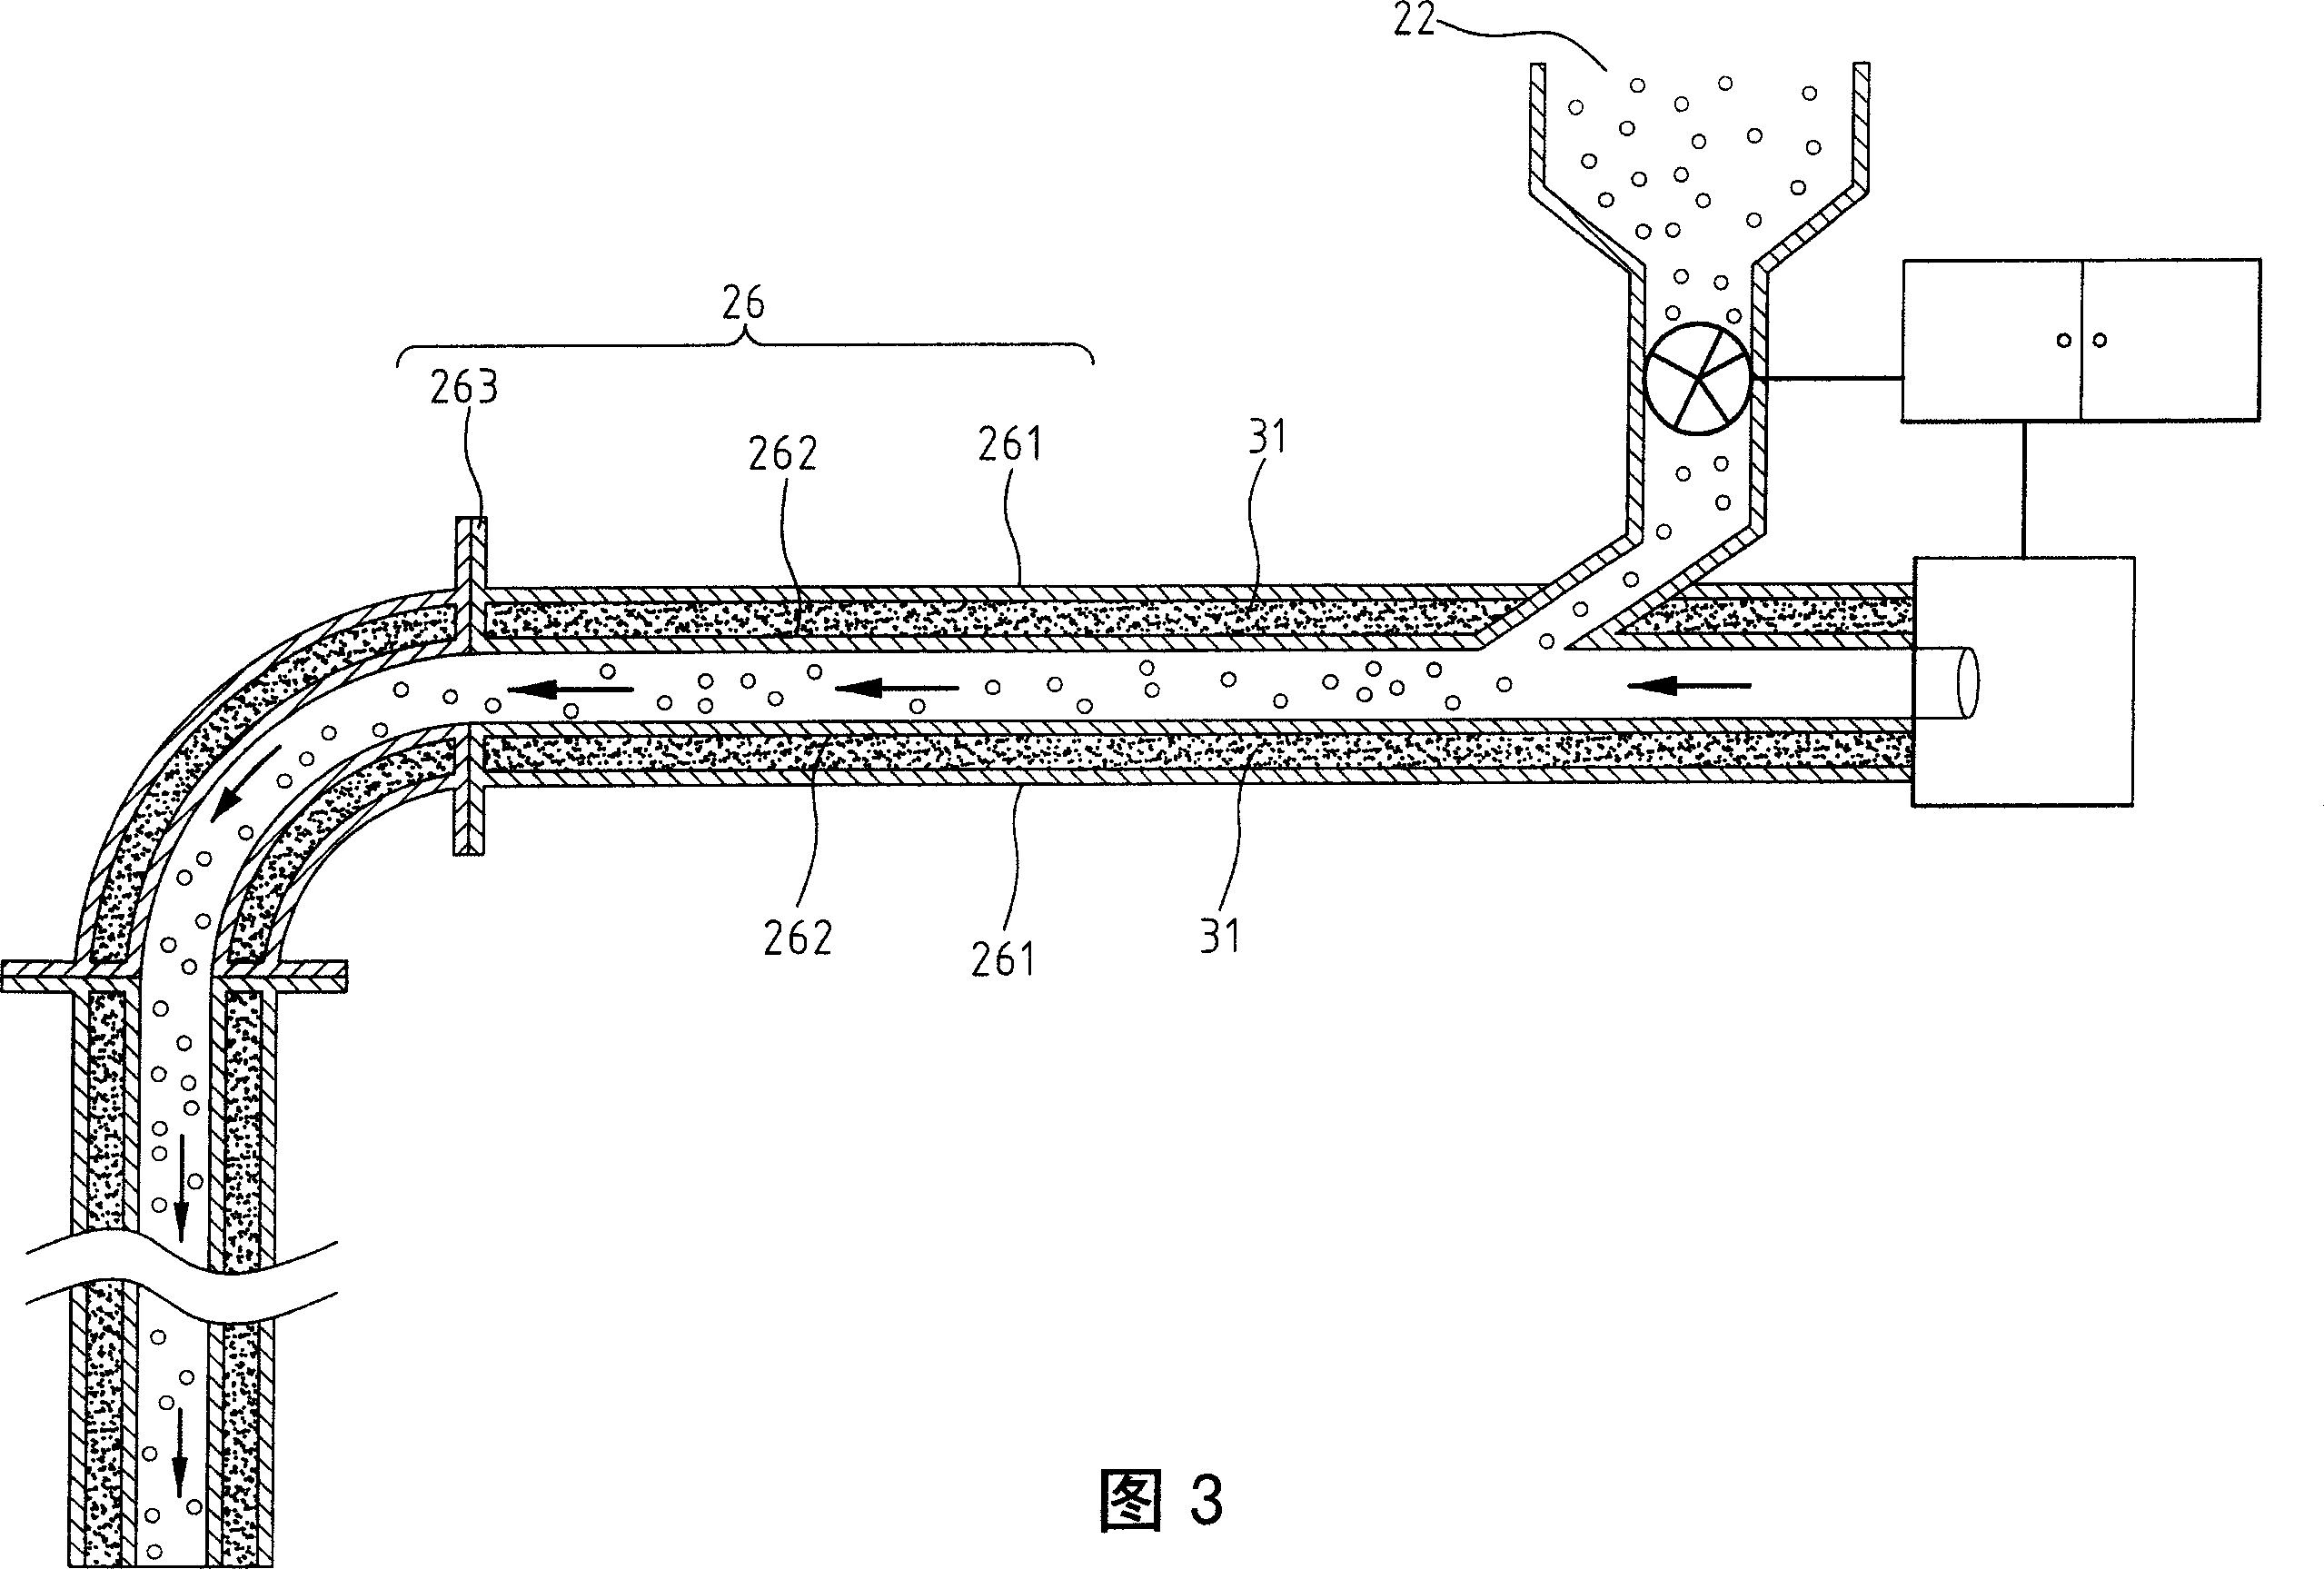 Glass waster material fluid transmission system